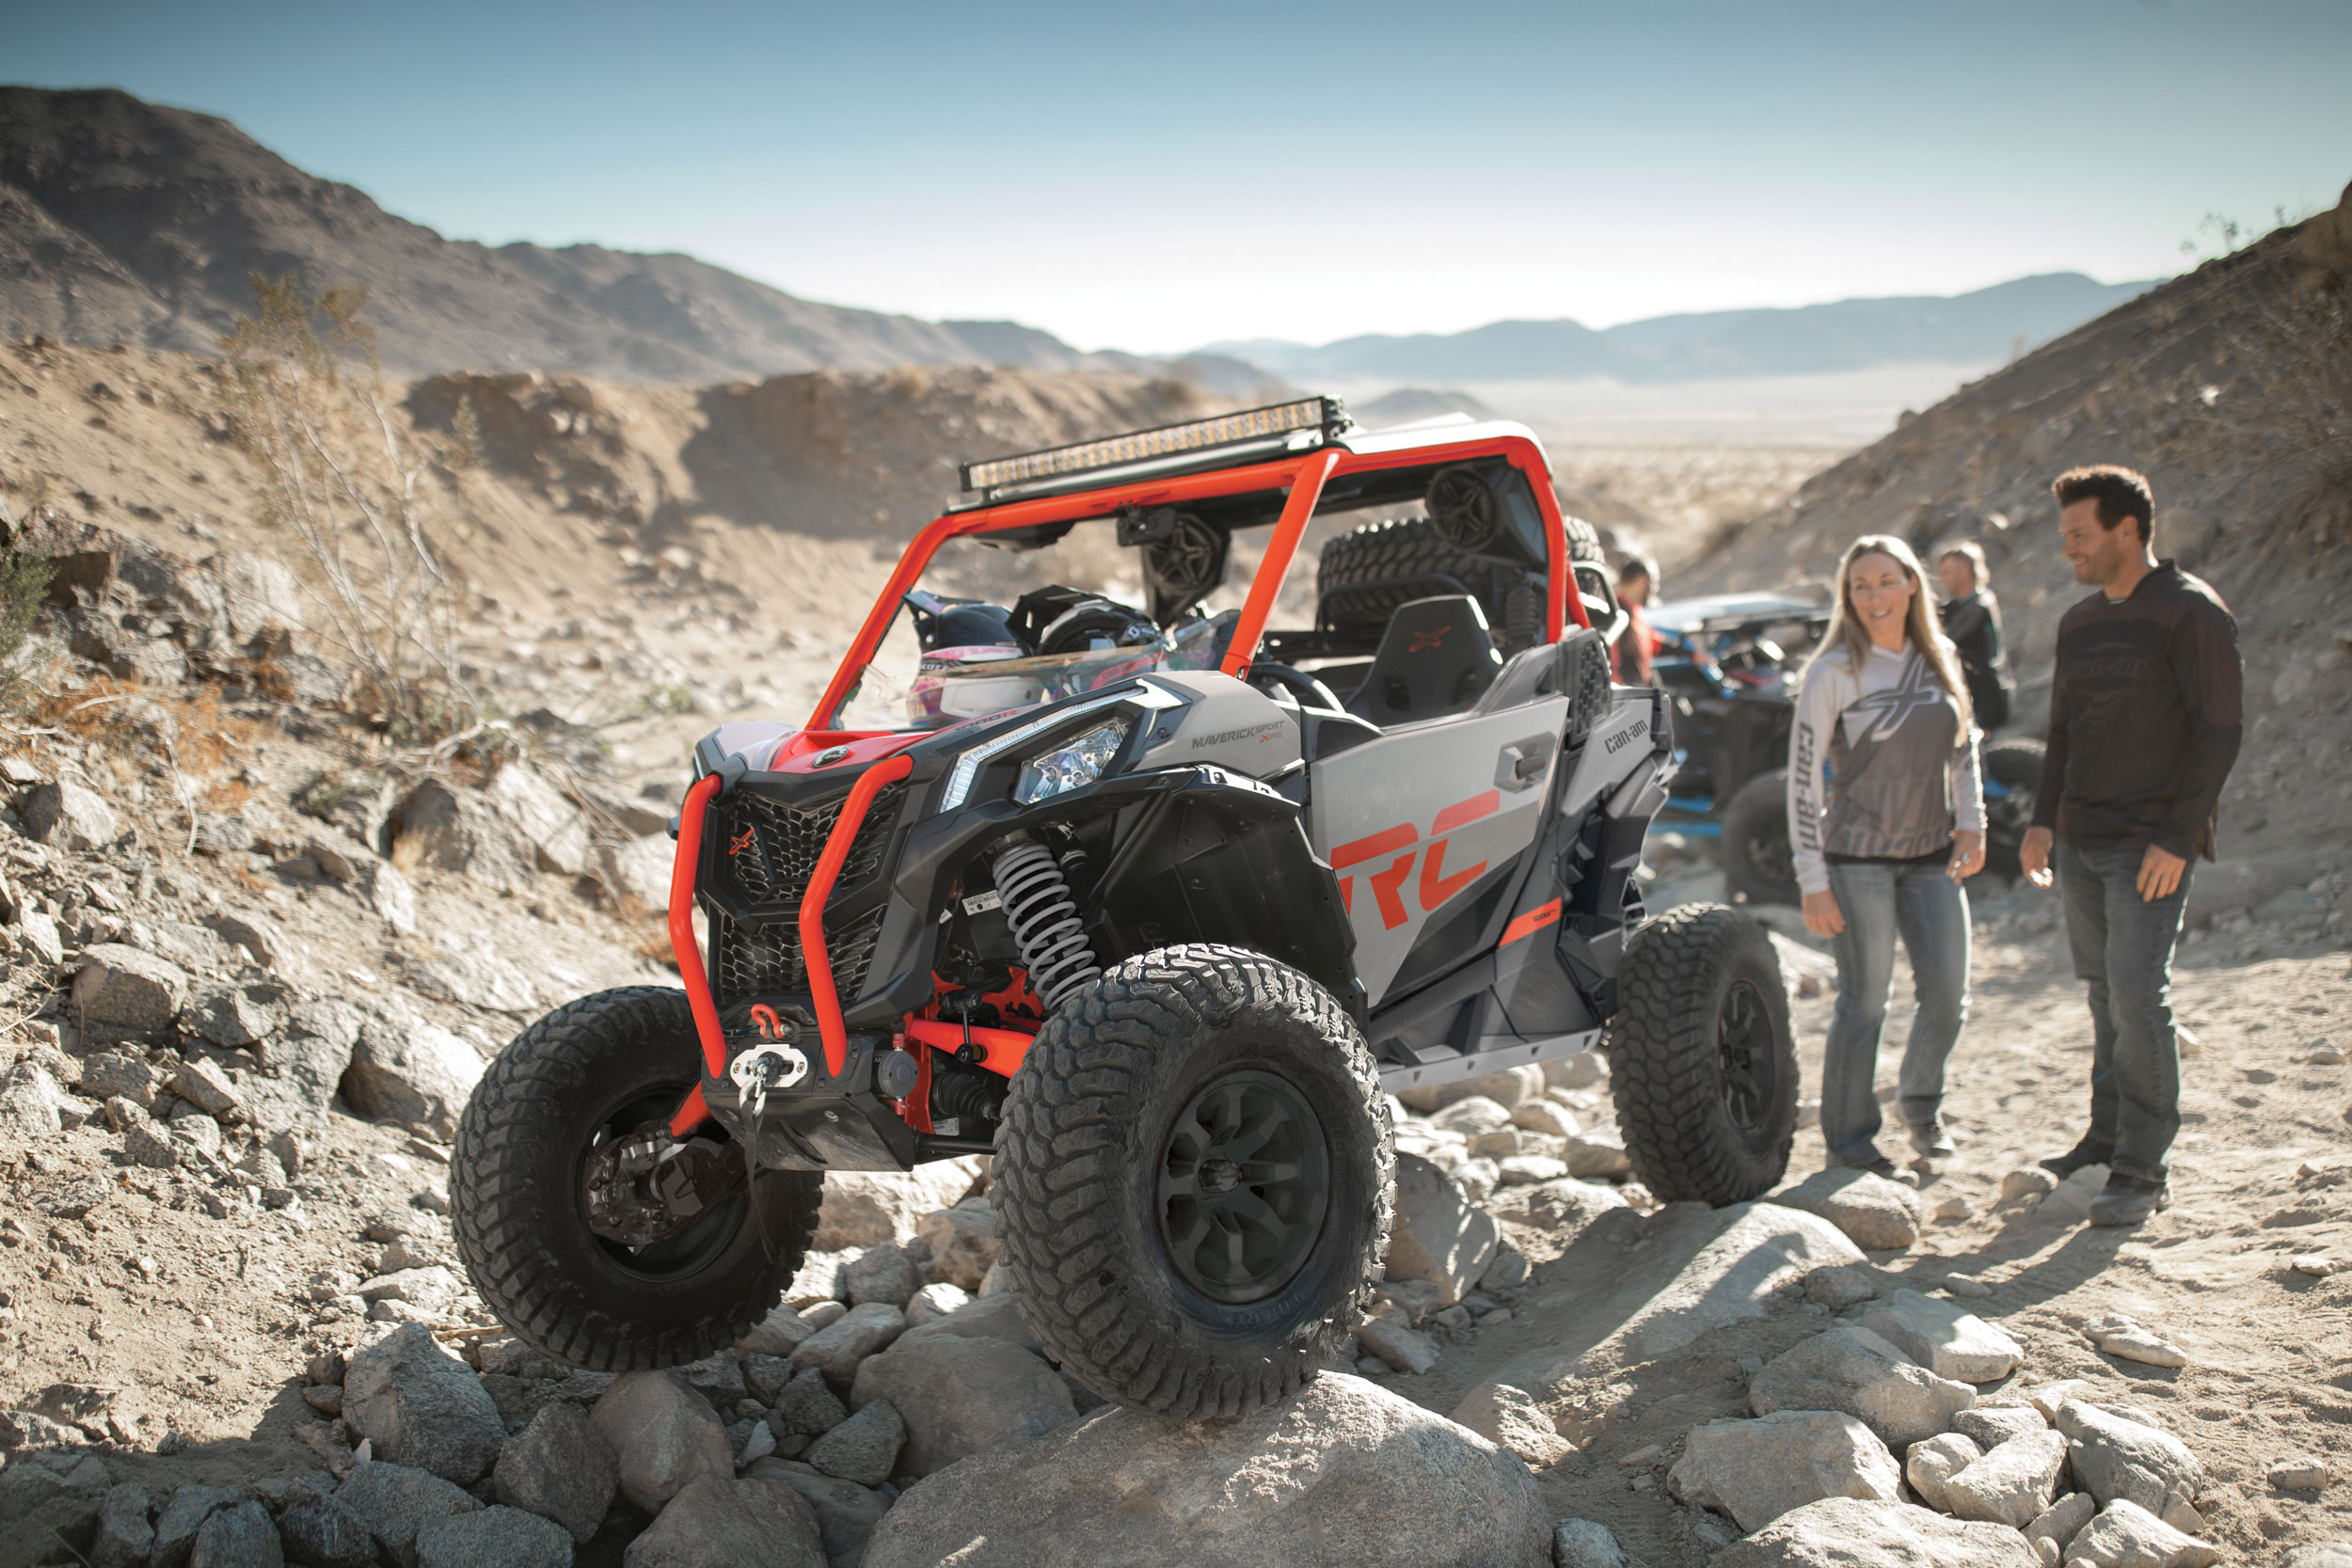 Two people looking at a parked Can-Am Maverick Sport X rc side-by-side on rocks